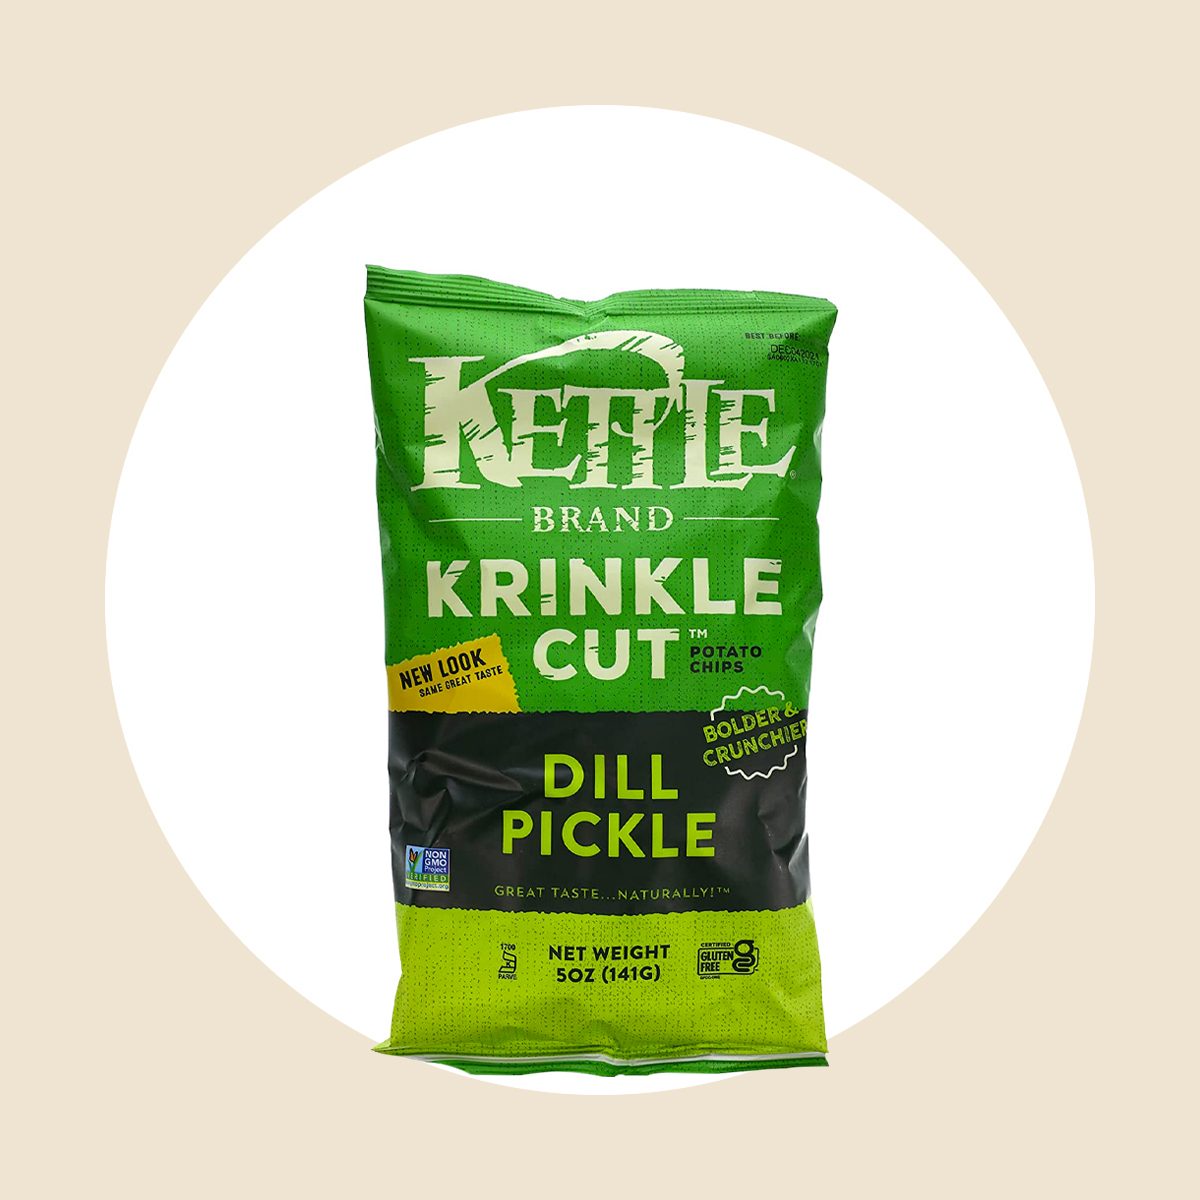 Kettle Brand Potato Chips Krinkle Cut Dill Pickle Kettle Chips Ecomm Amazon.com